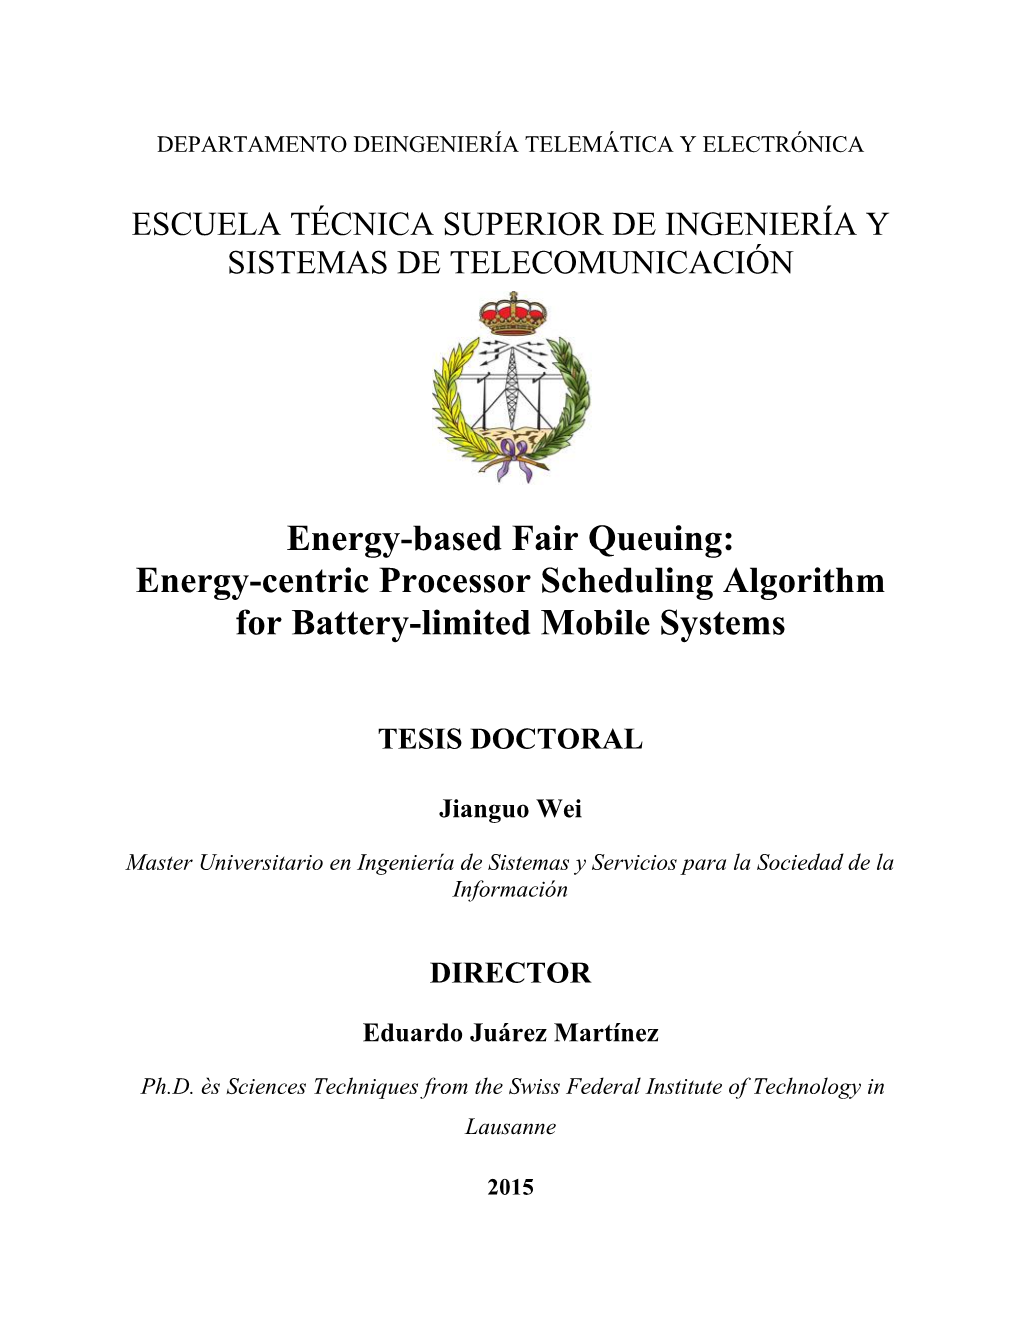 Energy-Centric Processor Scheduling Algorithm for Battery-Limited Mobile Systems